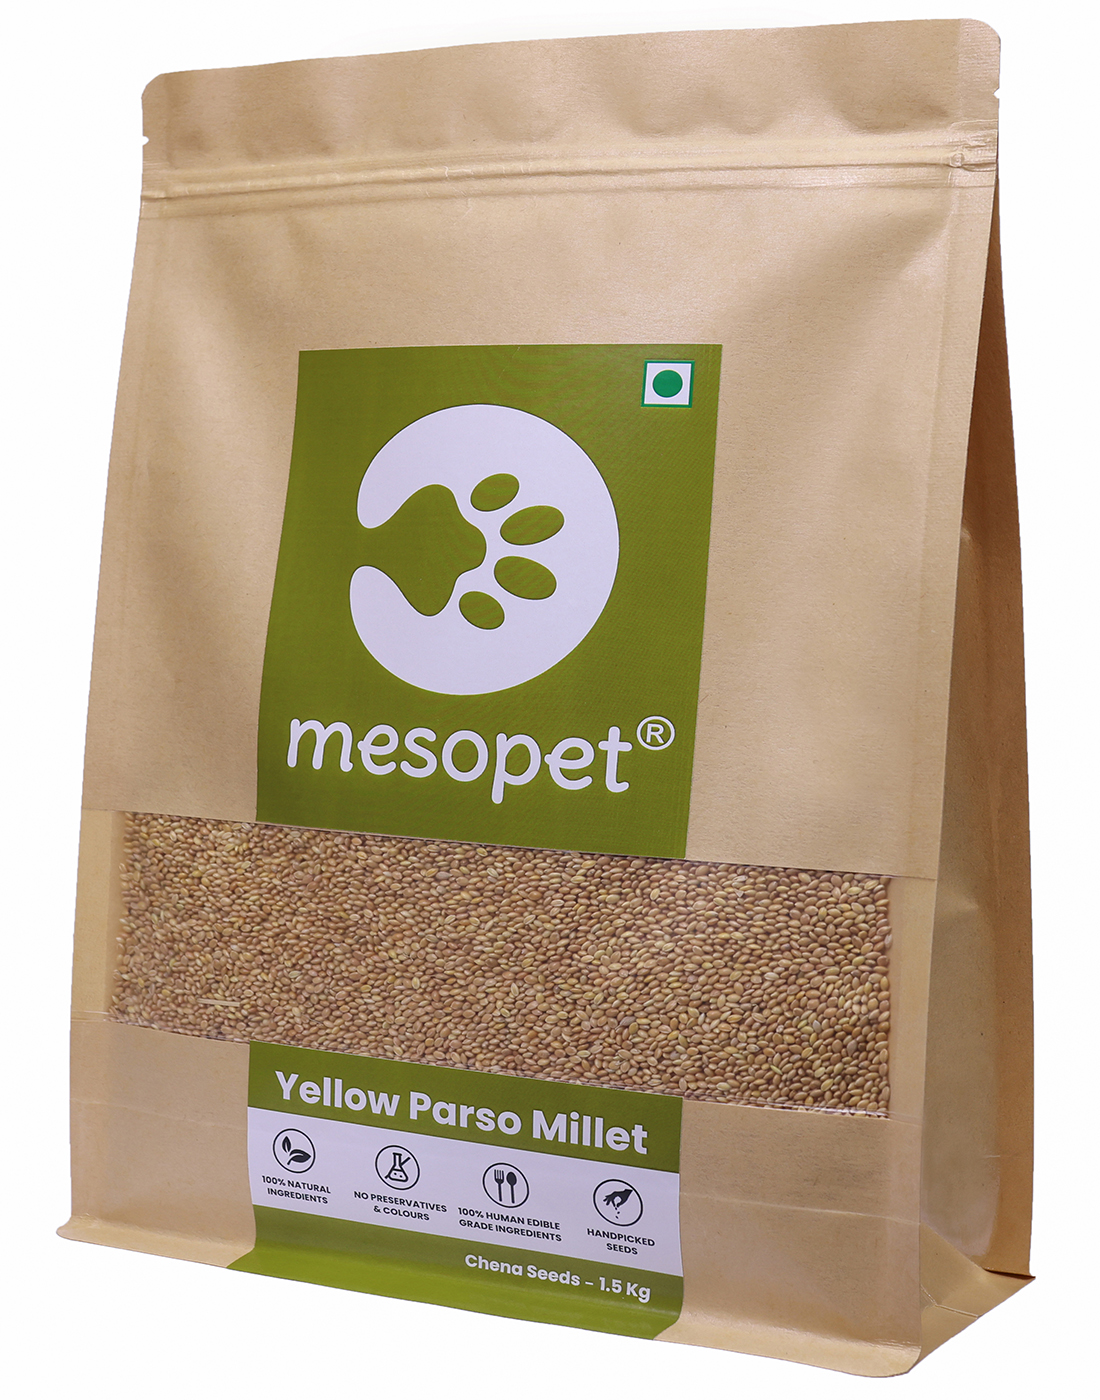 Mesopet Yellow Parso Millet (Chena Seeds), Bird Food for All Life Stages Budgies, Canary, Cockatiels, Finches, Lovebirds, Parrots & Parakeets